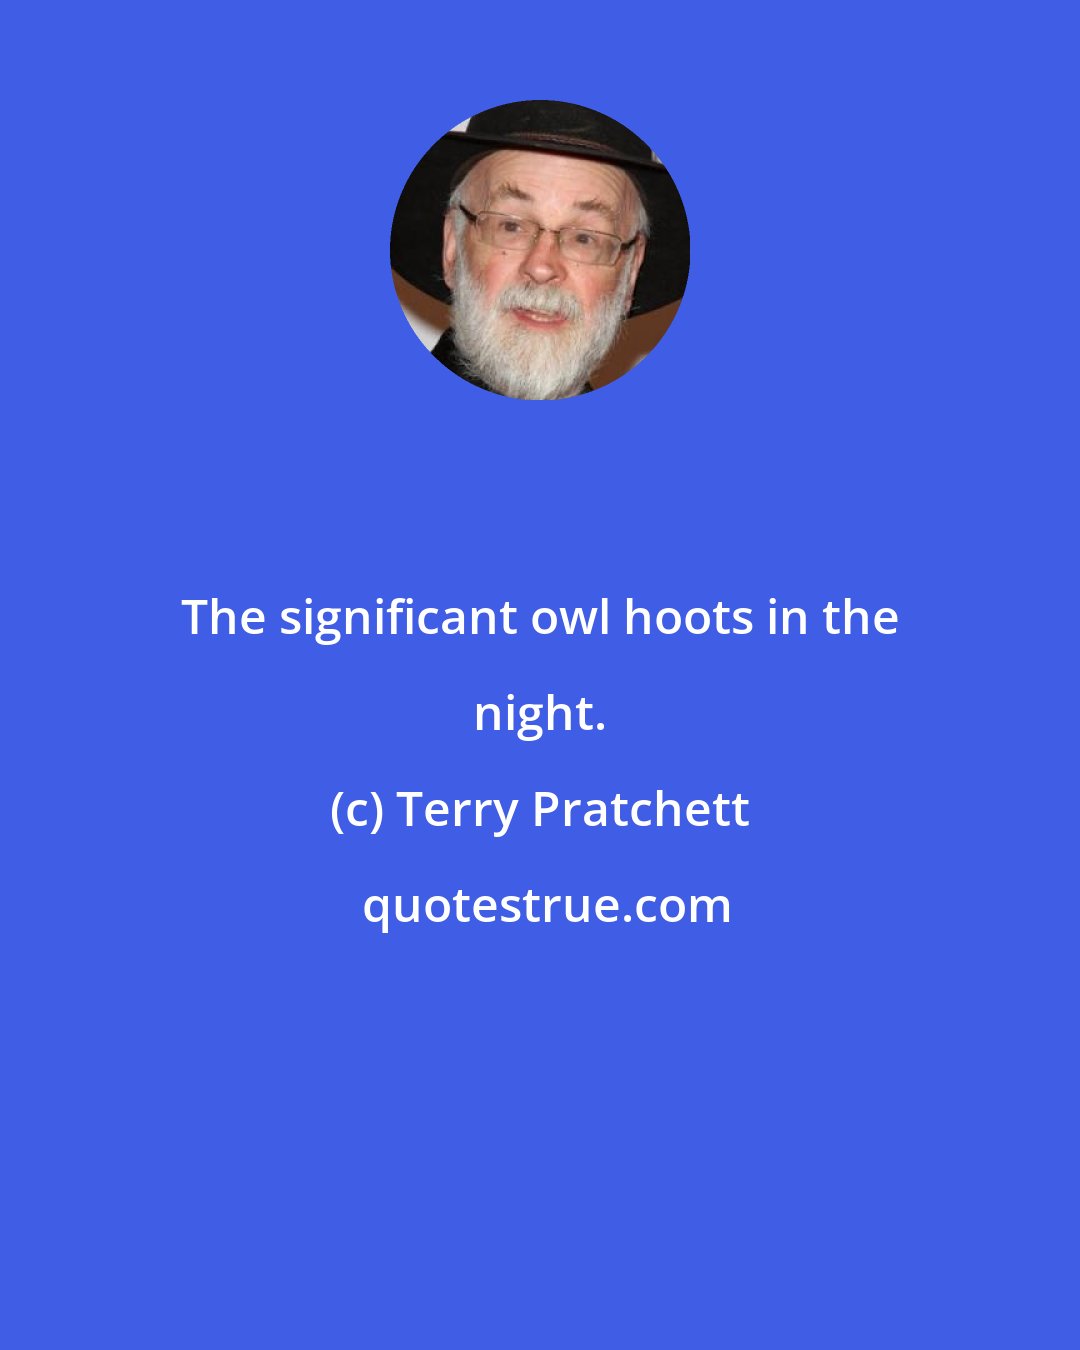 Terry Pratchett: The significant owl hoots in the night.